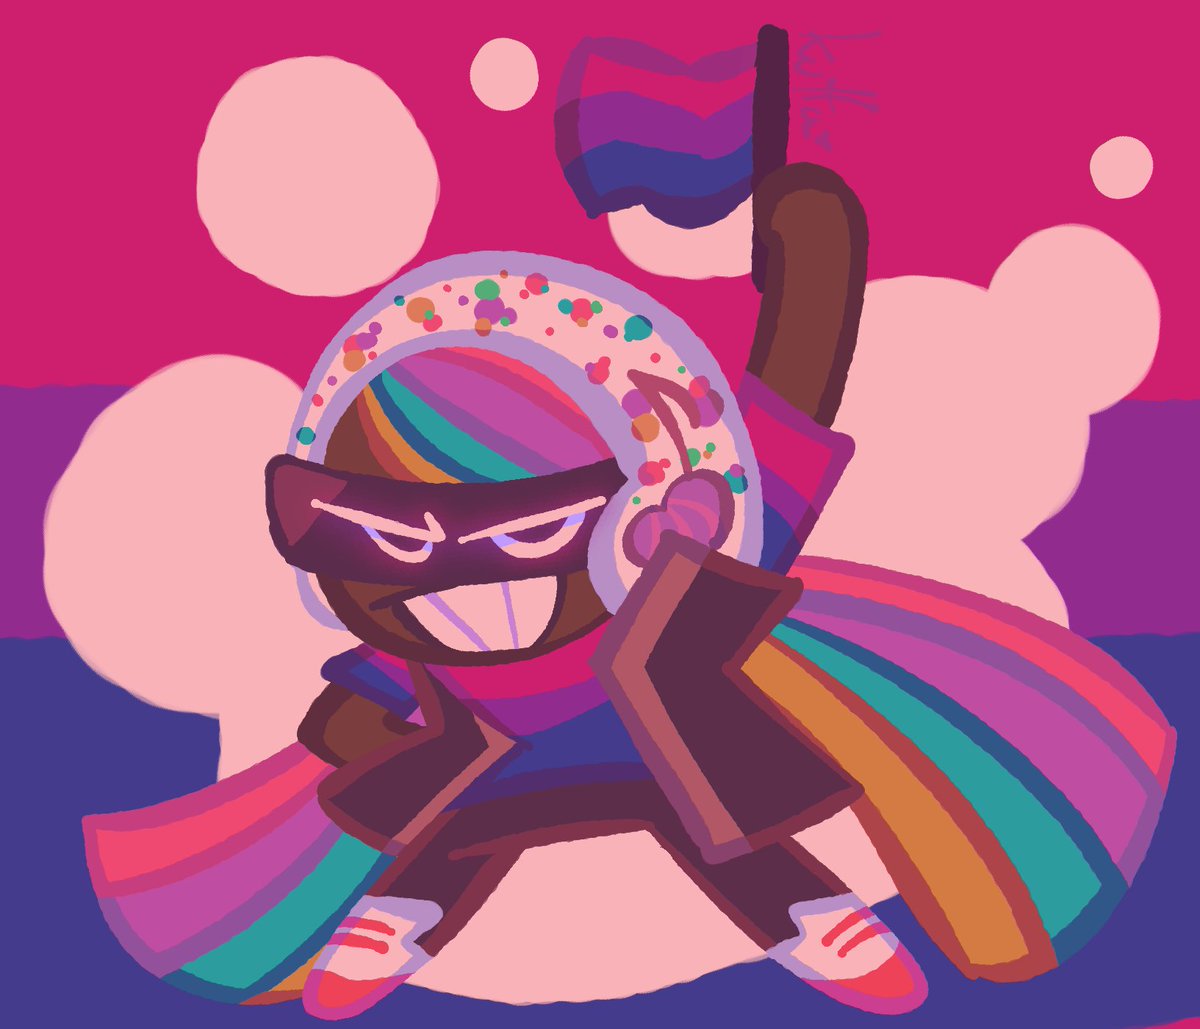 last day of bi visibility month have the most bisexually bisexual bicon ever 
[ #cookierun #cookierunovenbreak #djcookie #BiVisibilityDay2022 ]